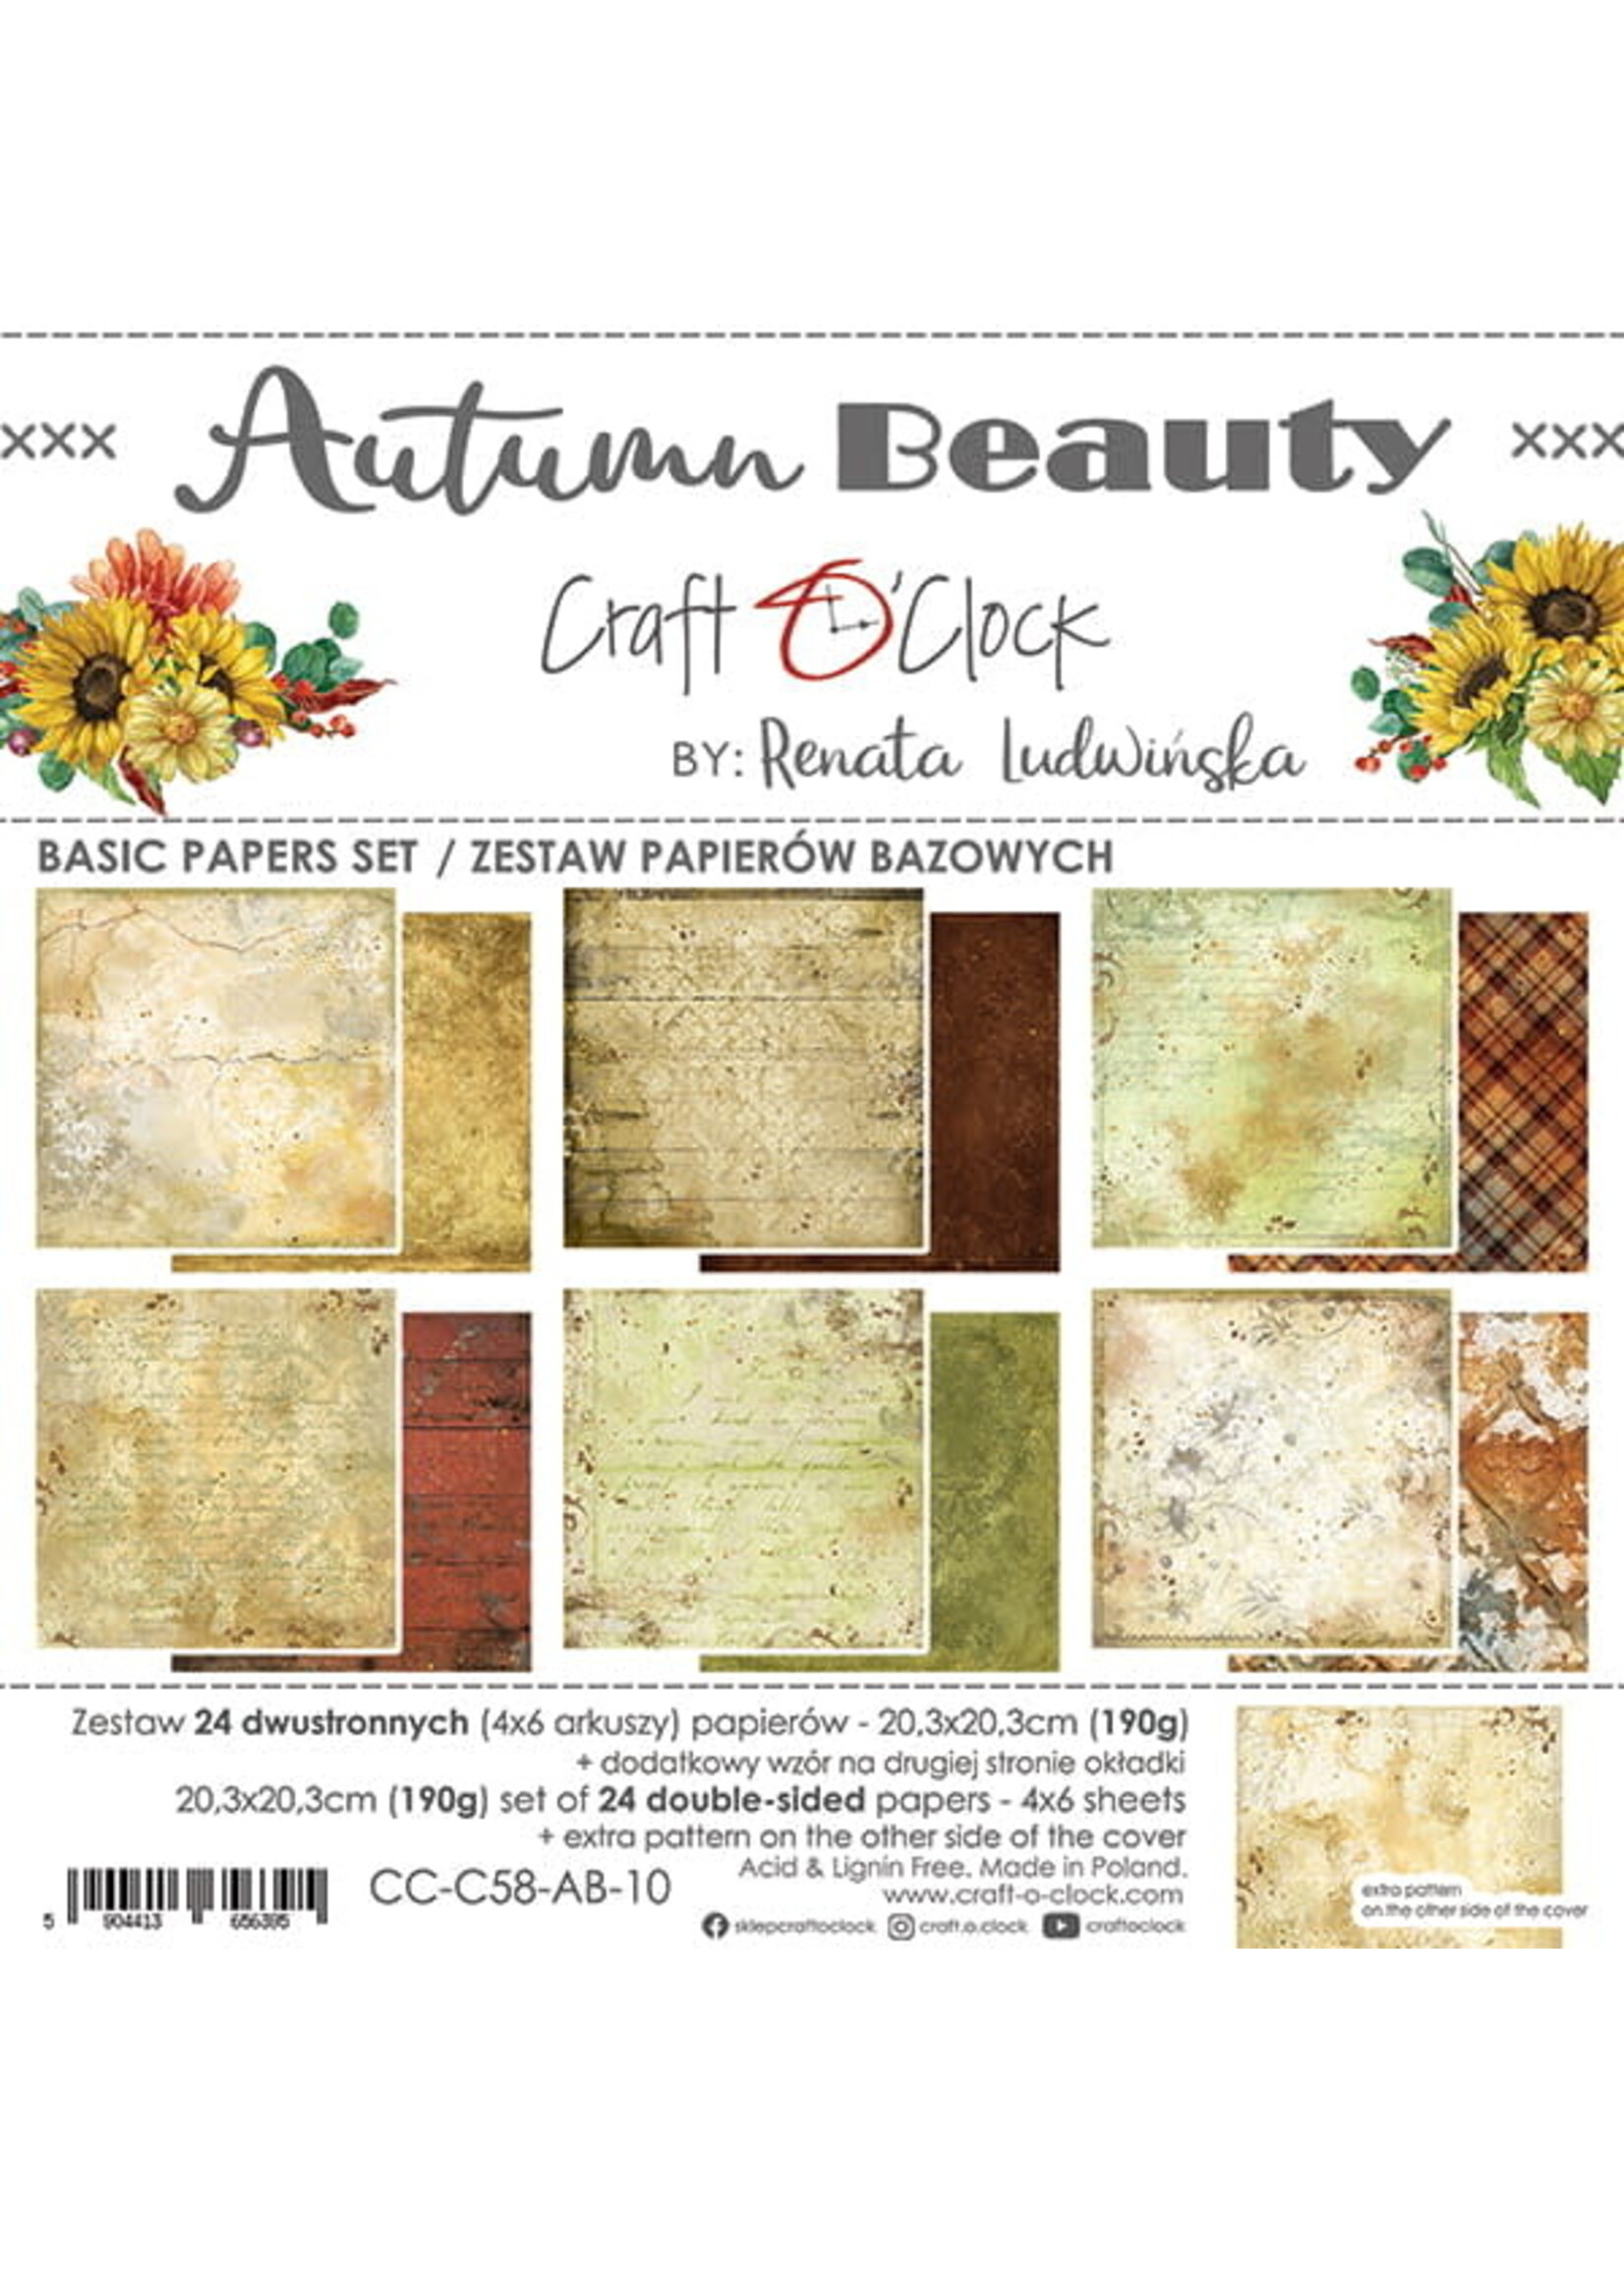 Craft O Clock AUTUMN BEAUTY - SET OF BASIC PAPERS 20,3X20,3CM